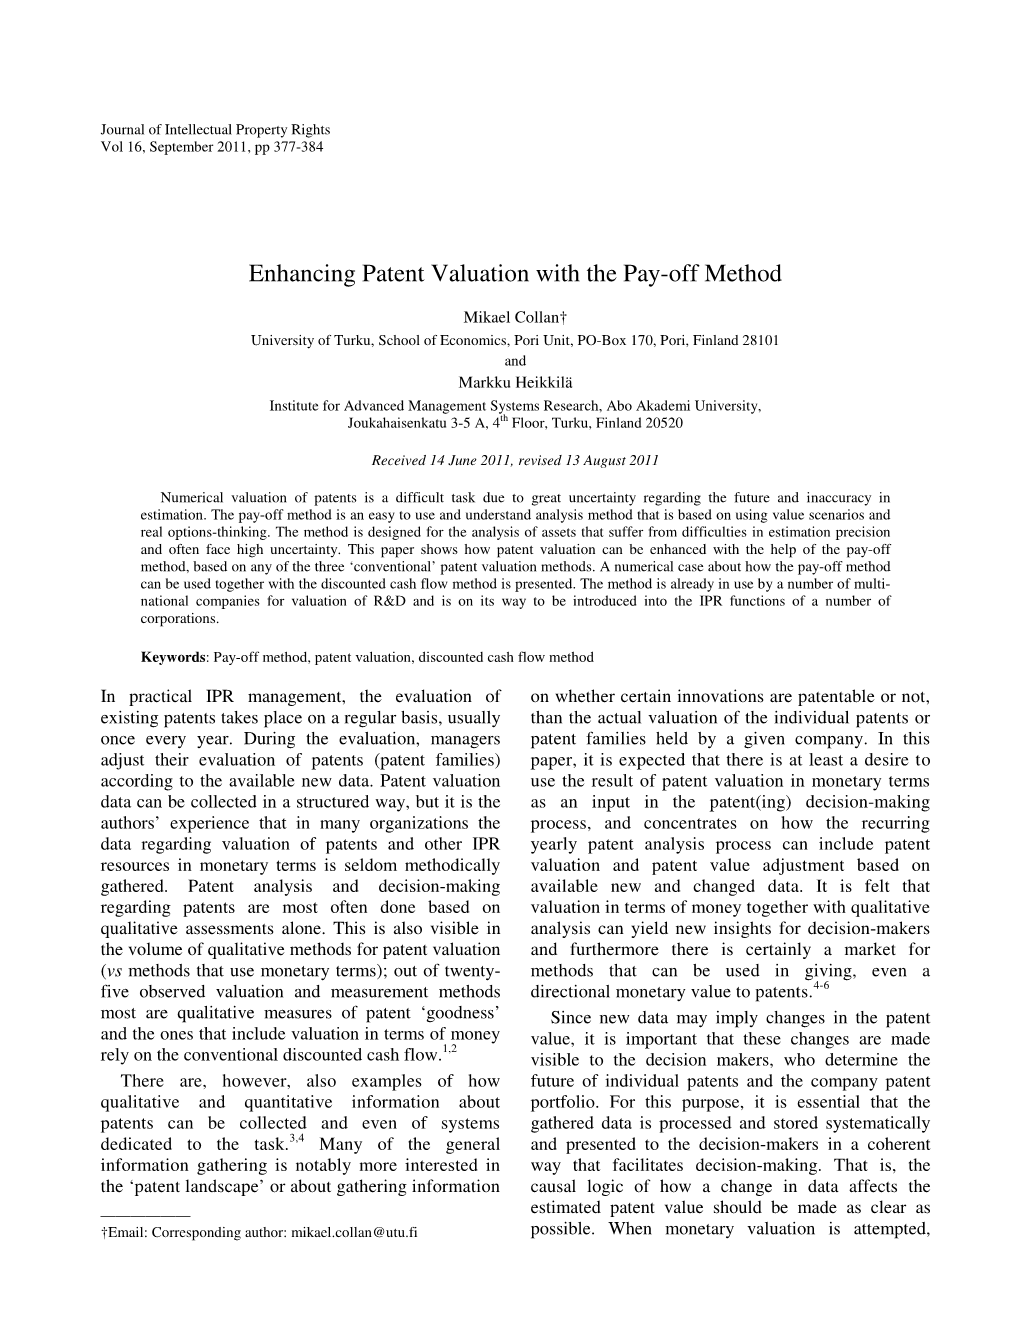 Enhancing Patent Valuation with the Pay-Off Method